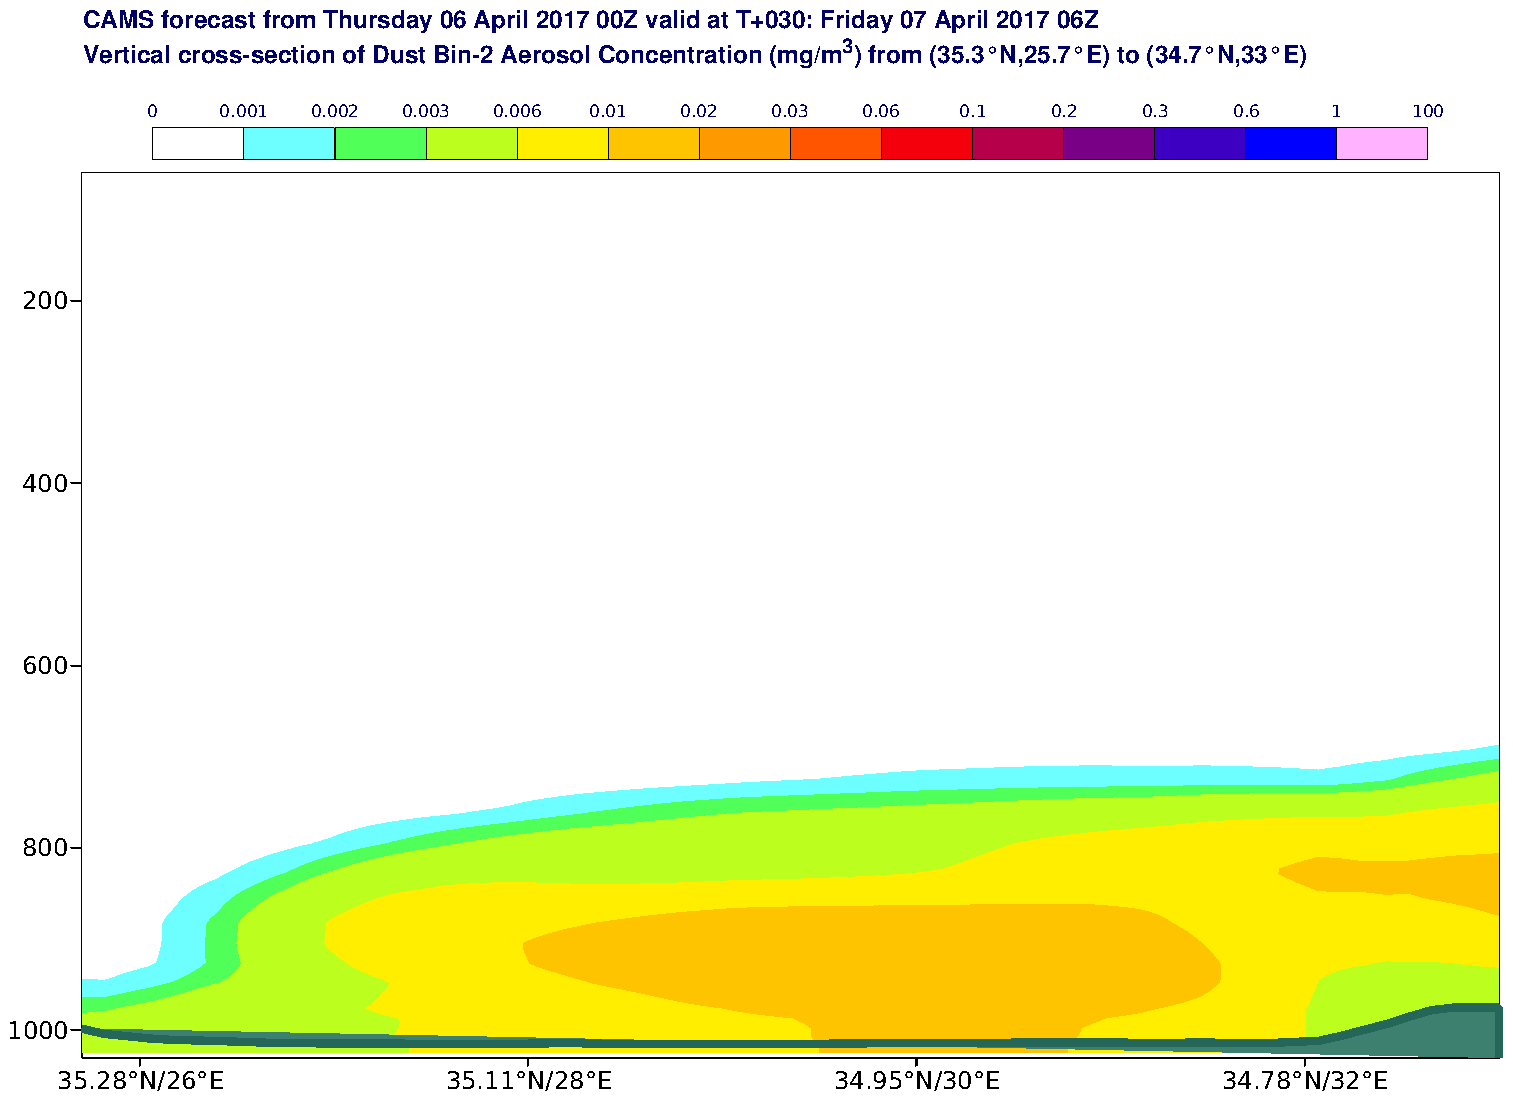 Vertical cross-section of Dust Bin-2 Aerosol Concentration (mg/m3) valid at T30 - 2017-04-07 06:00